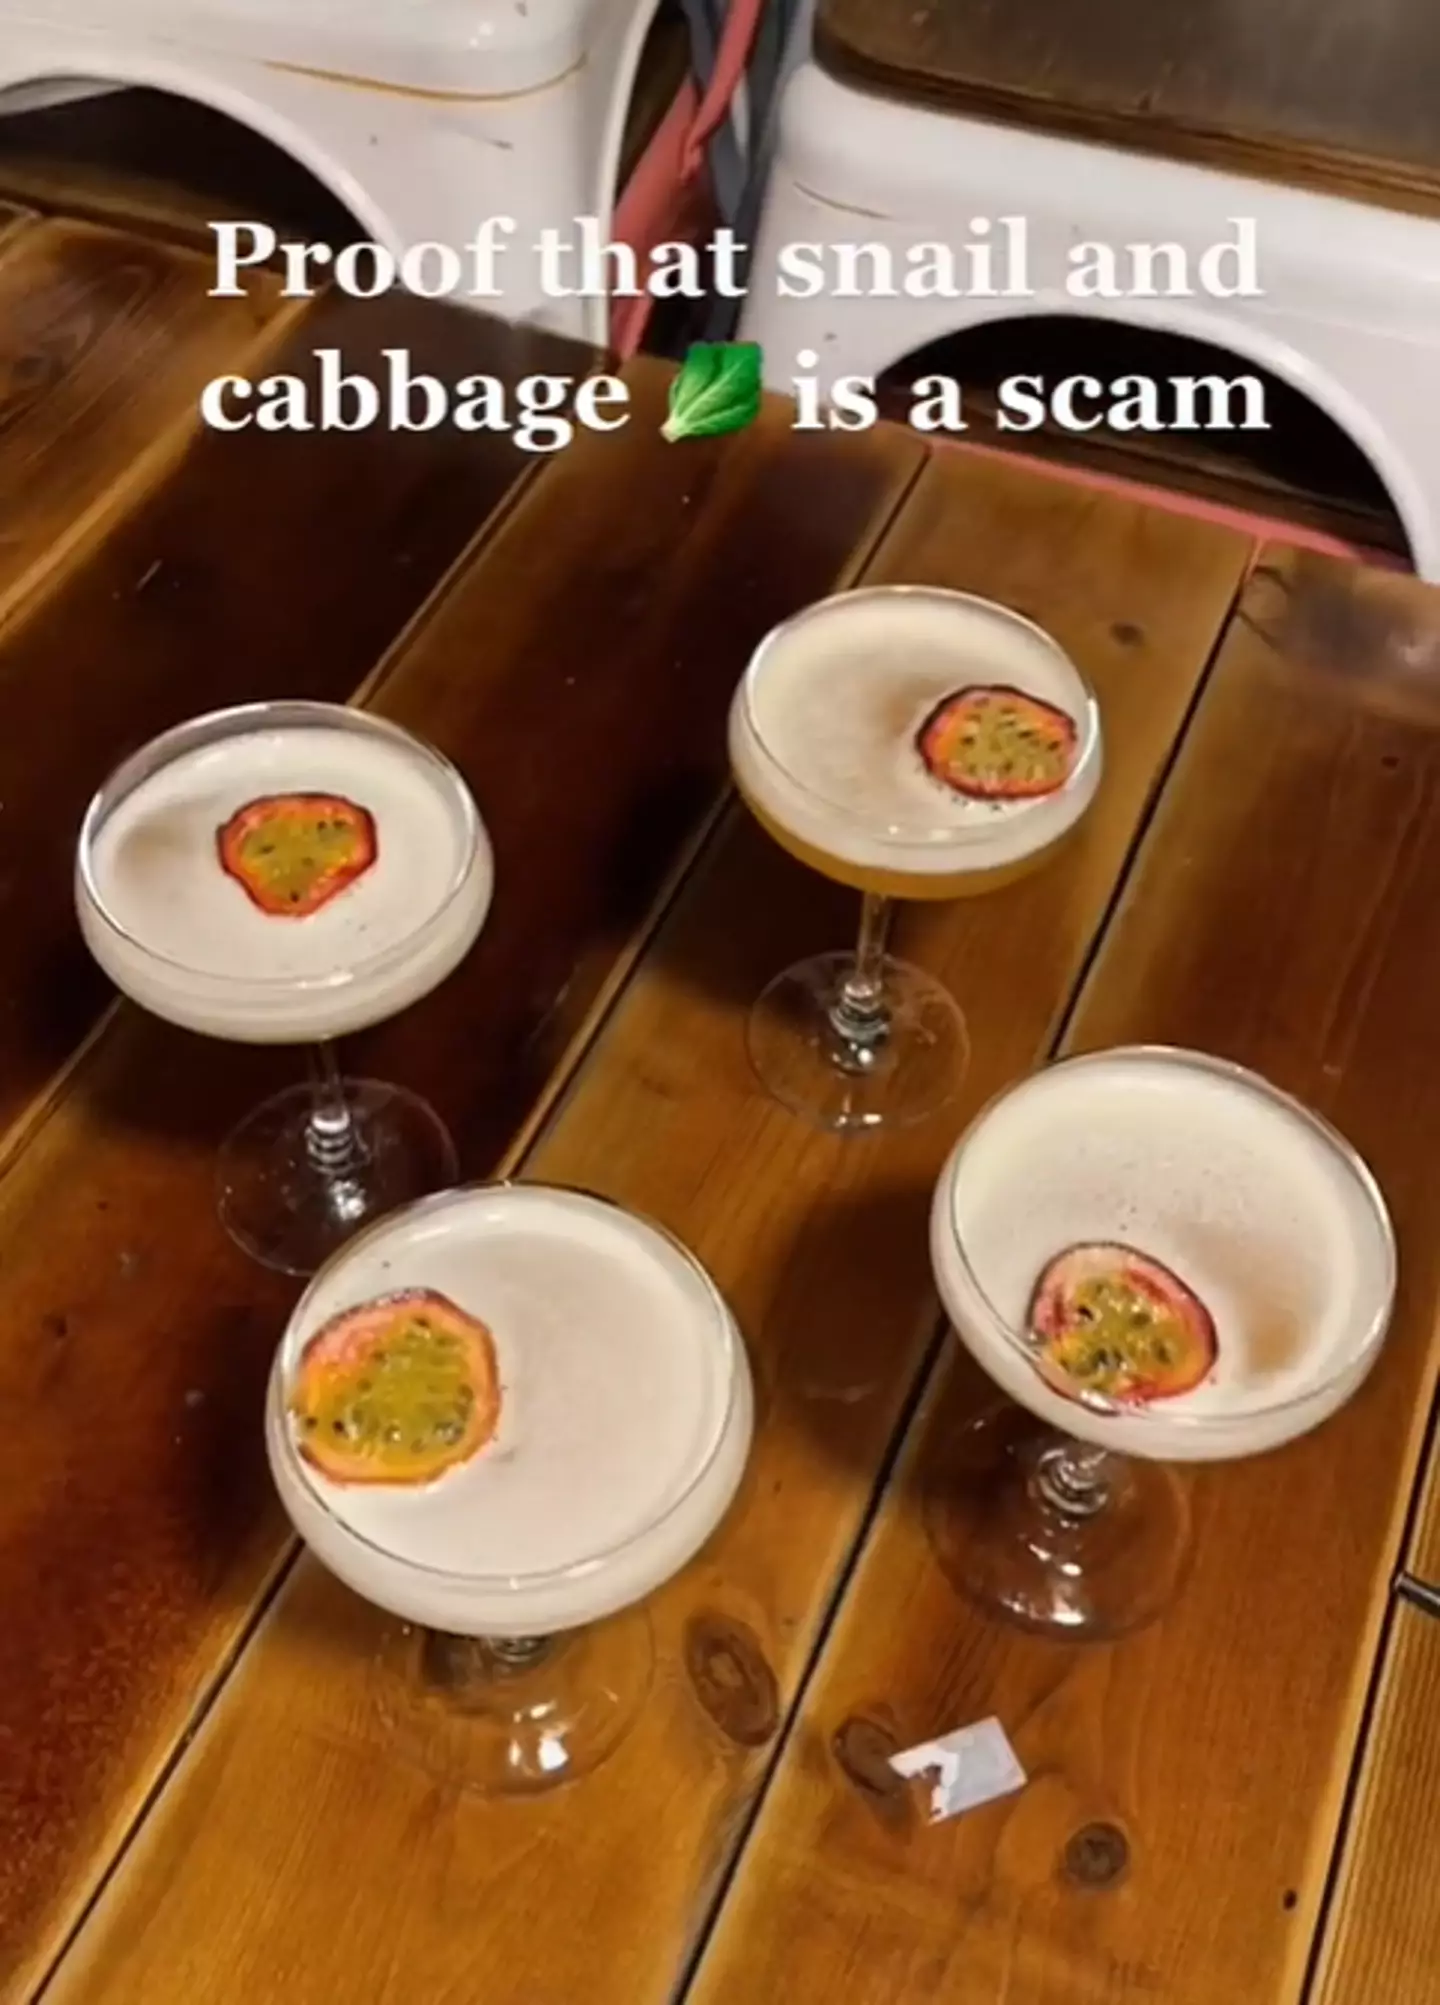 This TikTokker alleges that these cocktails are a scam (